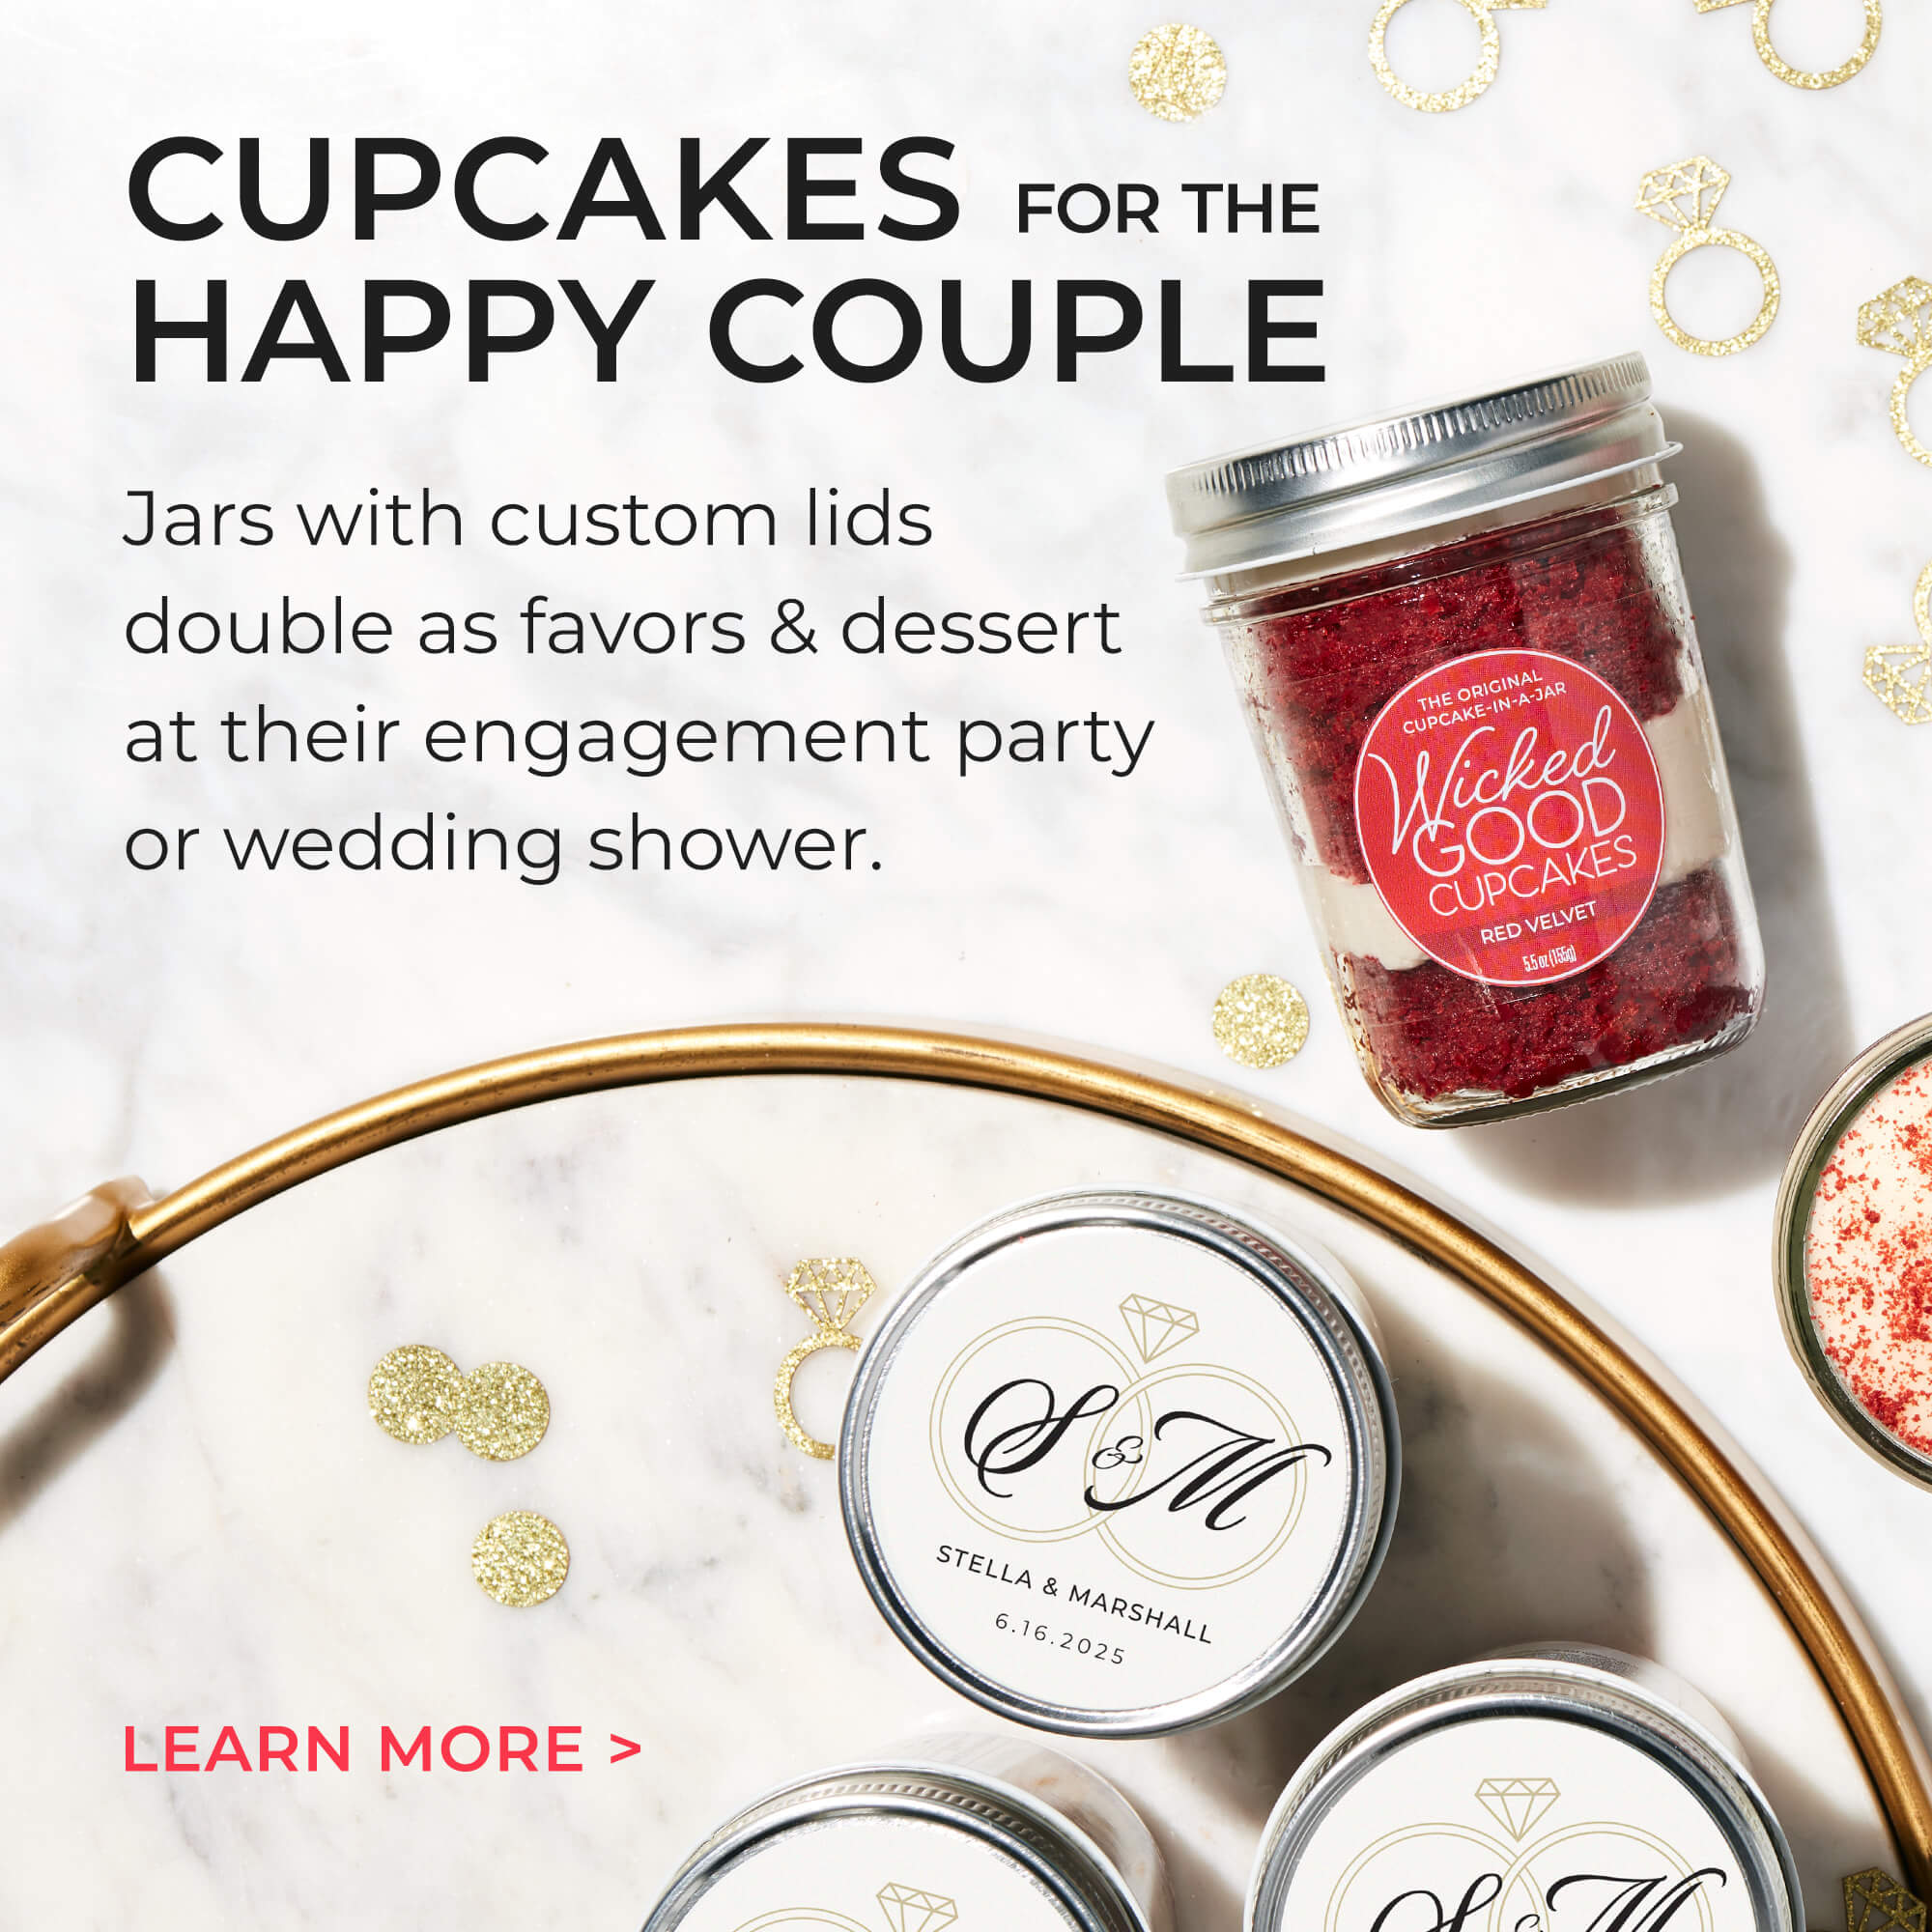 Cupcakes for the happy couple. Jars with custom lids double as favors & dessert at their engagement party or wedding shower.